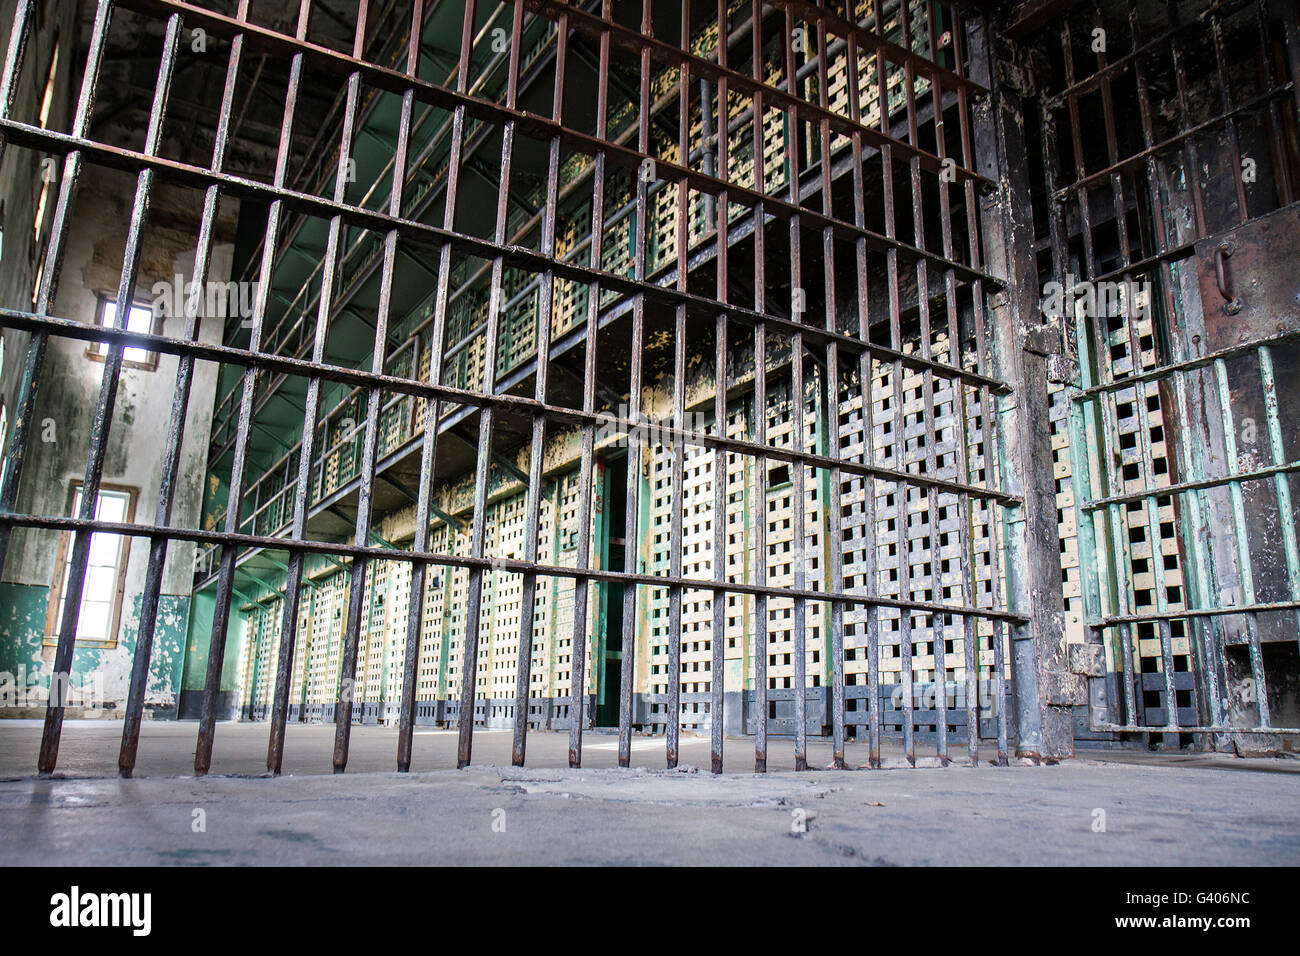 Low view showing how the prison bars are setup when the prisoners are locked away Stock Photo